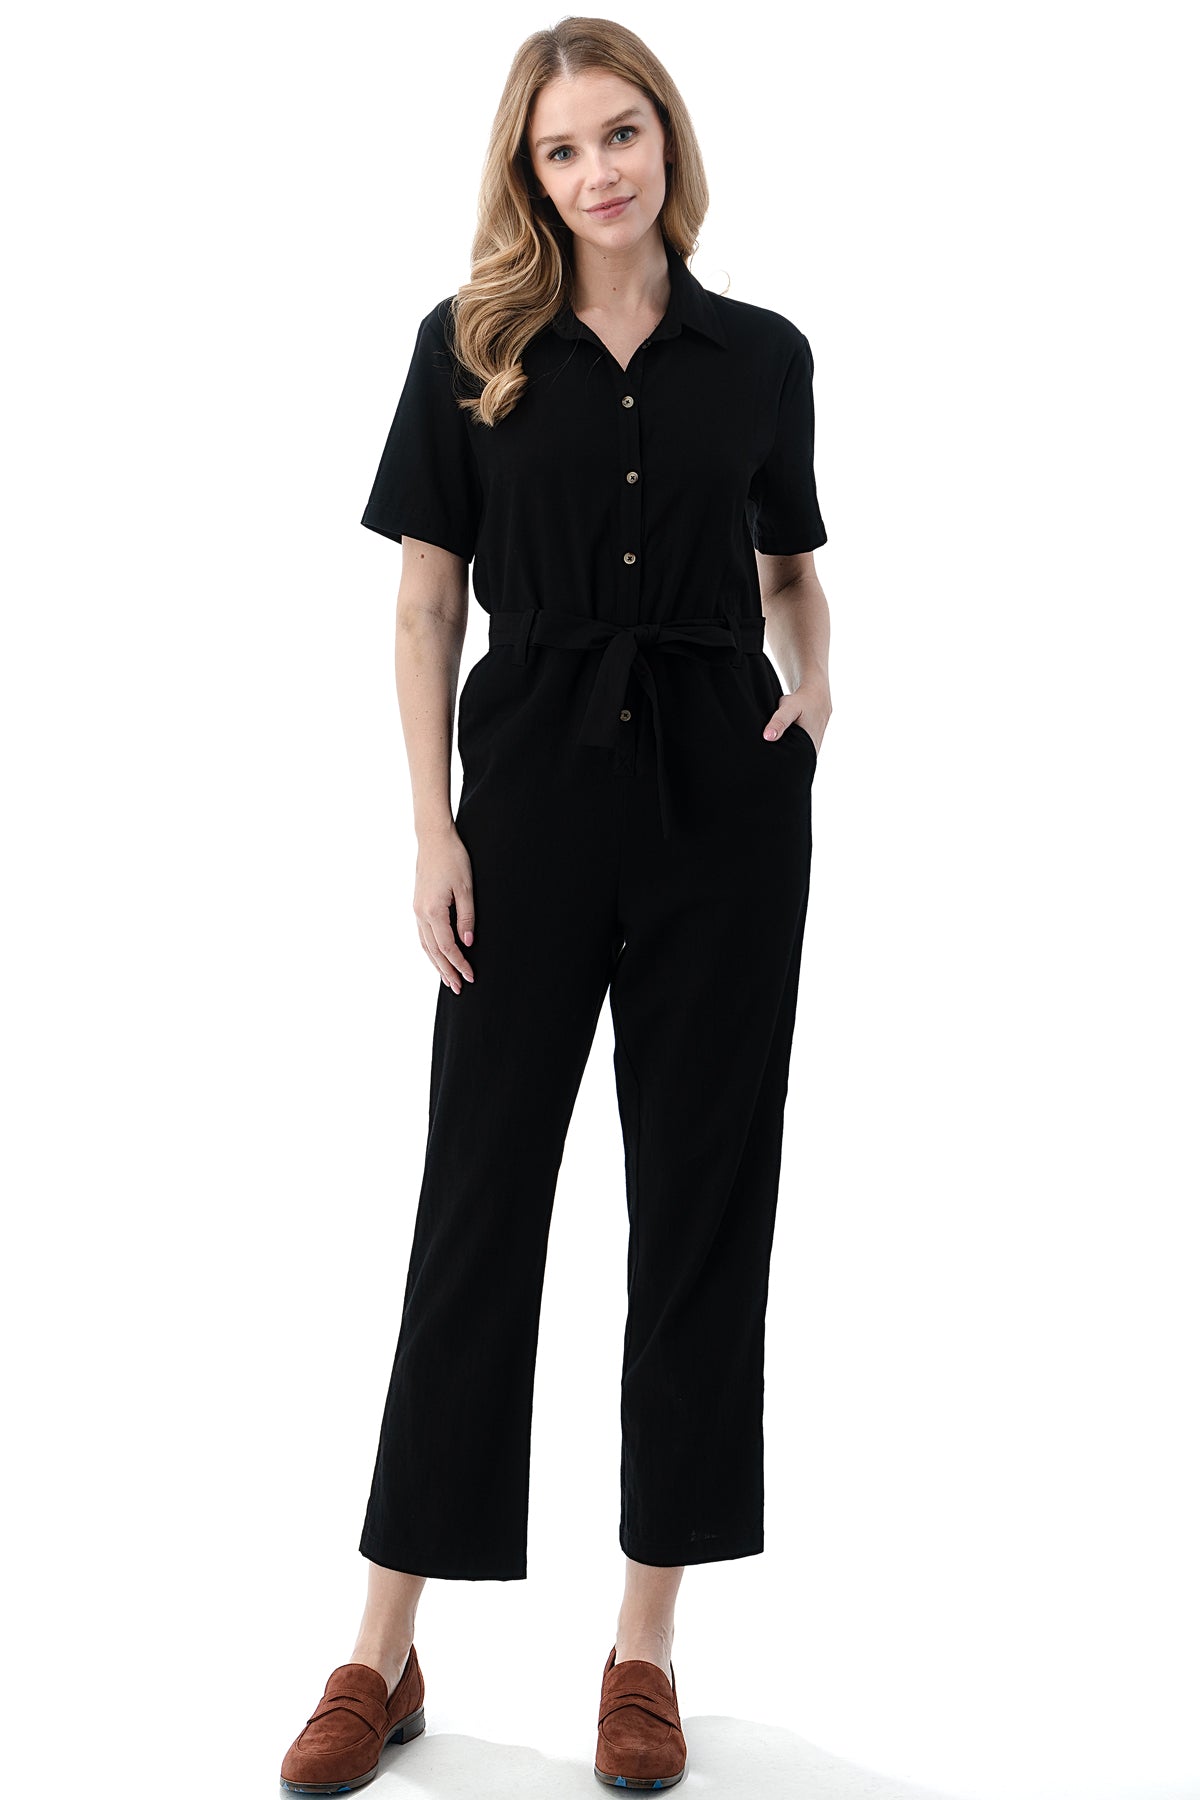 nsendm Women Short Sleeve Jumpsuit Women's Short Sleeve Collared Cropped  Coverall Button Down Tie Waist Overlay Suit Women Pants Black Small 